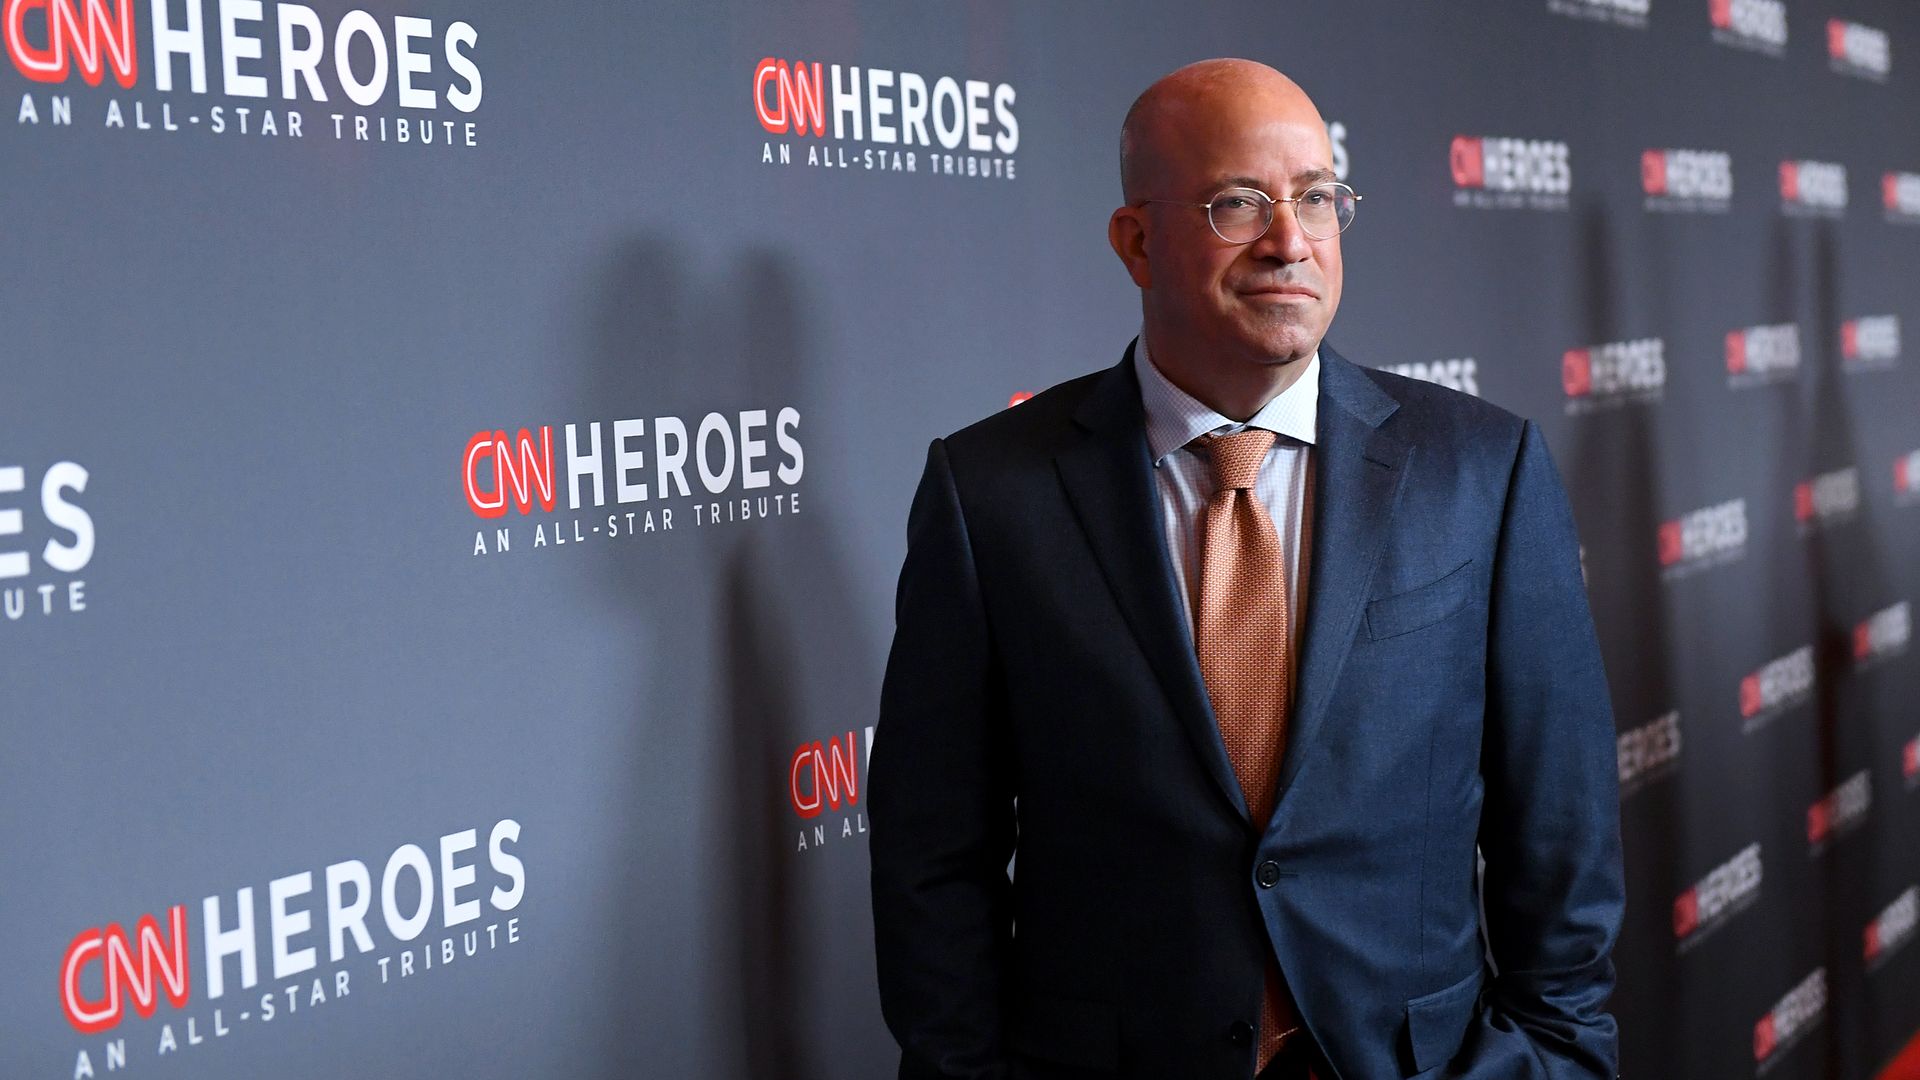 Chairman, WarnerMedia Jeff Zucker attends CNN Heroes at American Museum of Natural History on December 08, 2019 in New York City.